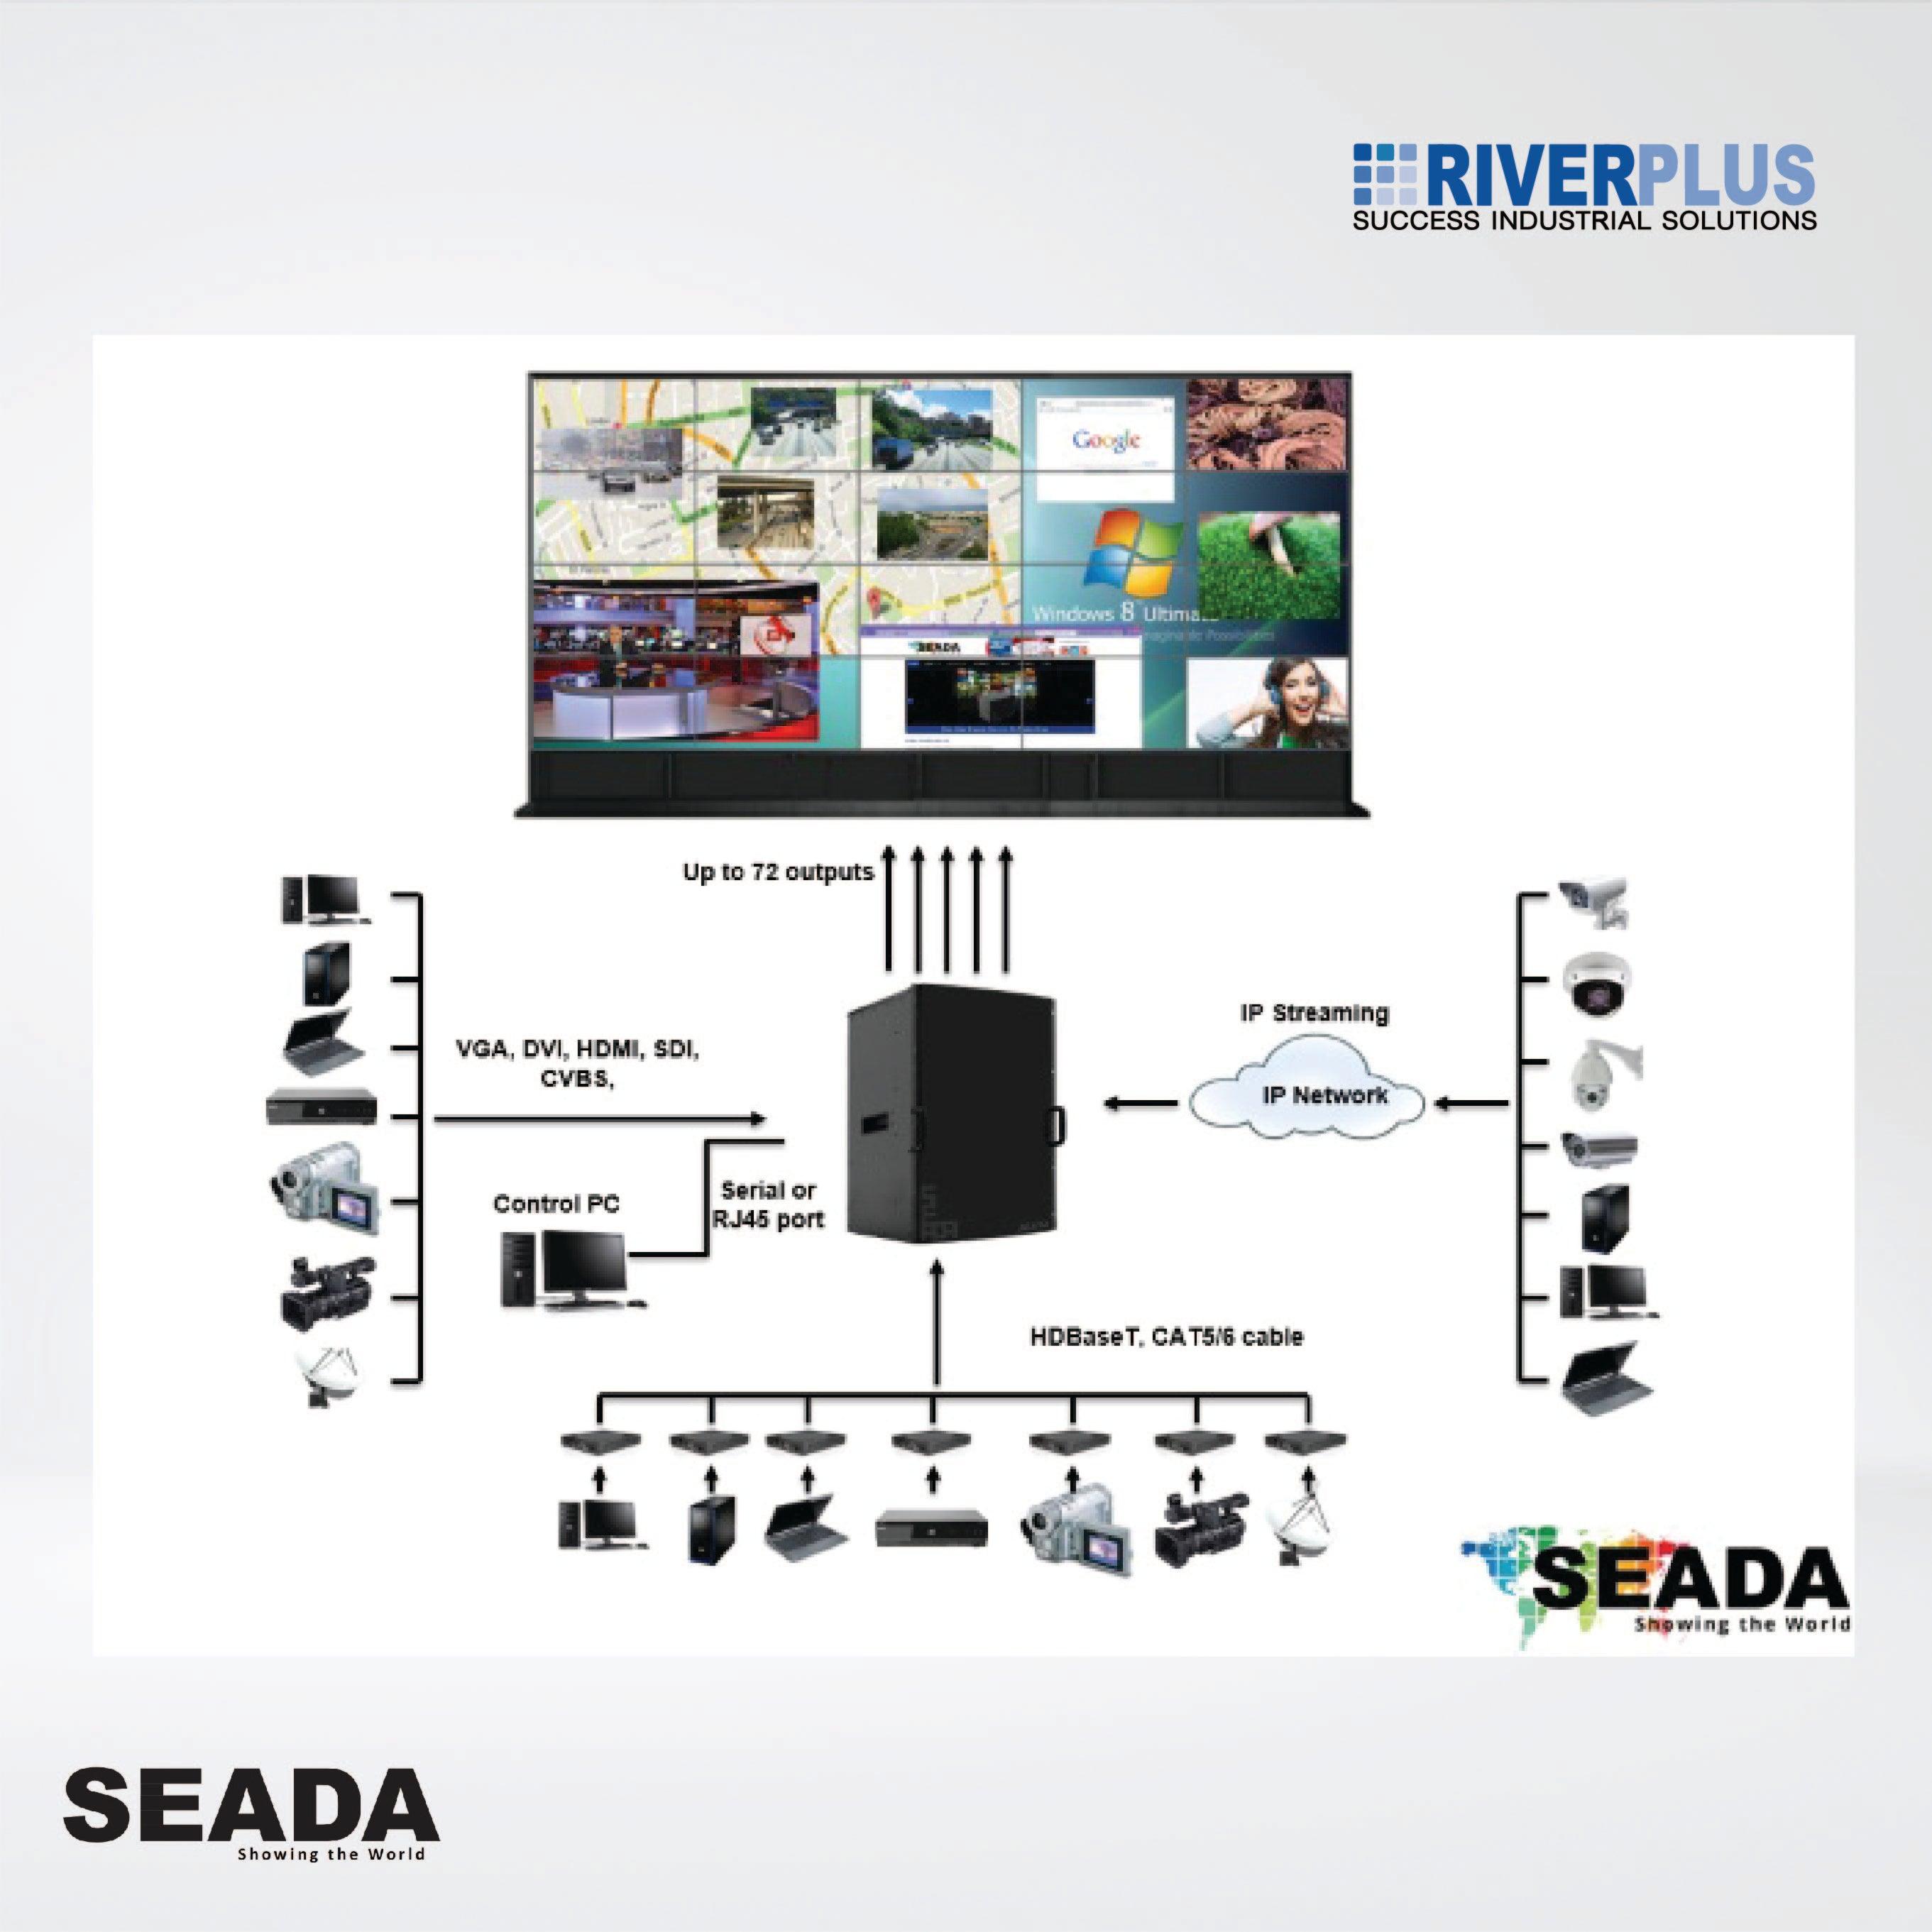 SW2072A Large size video wall ,support up to 72 display outputs / capture maximum 64 HD - Riverplus